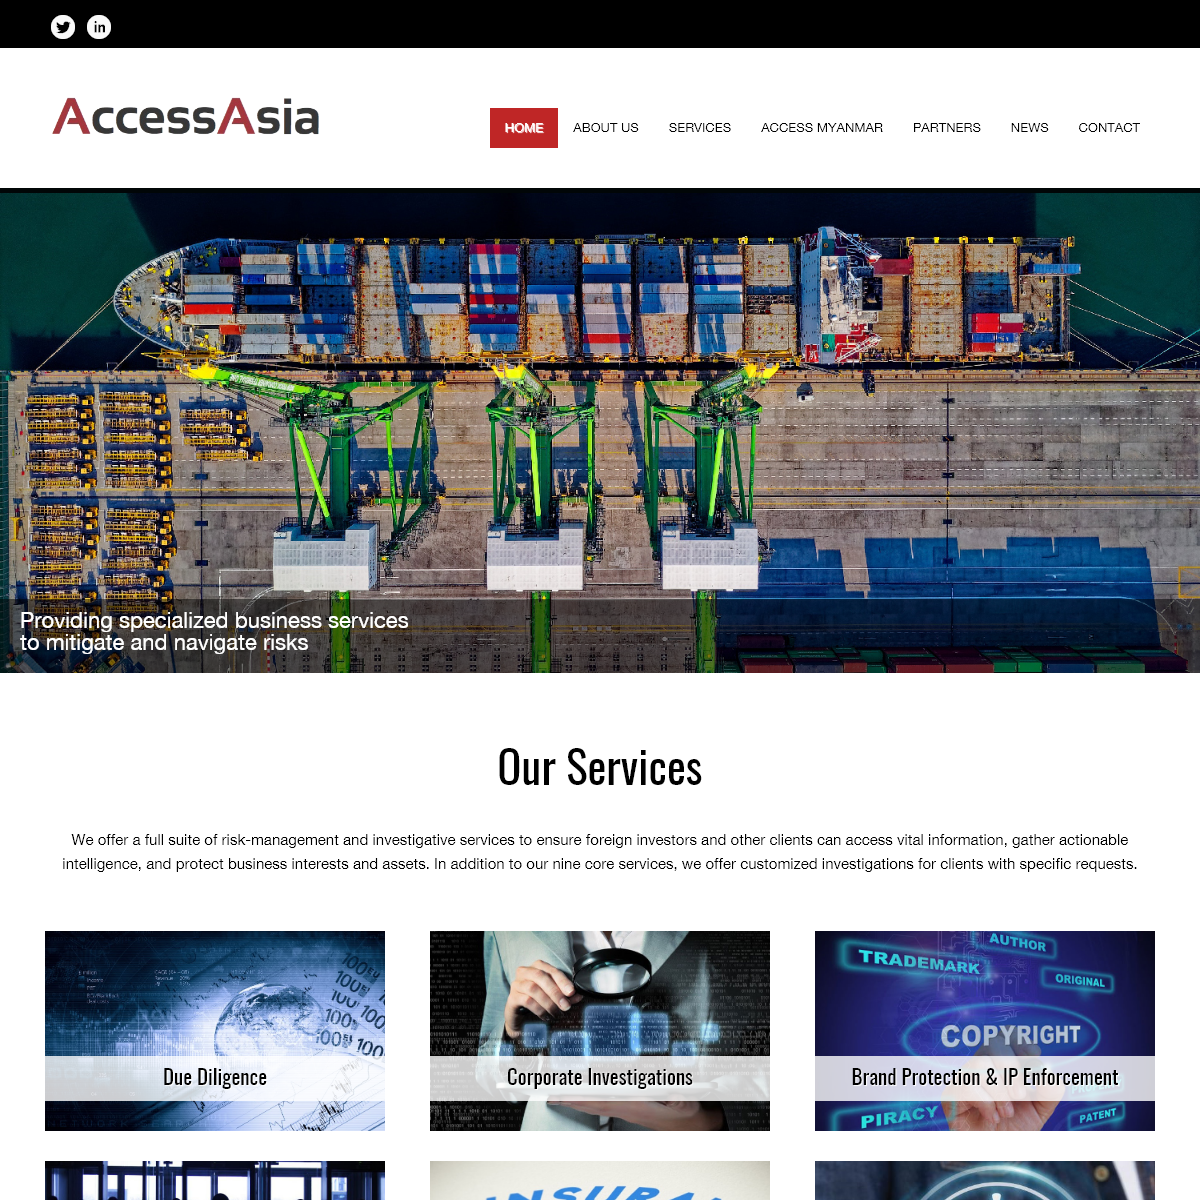 A complete backup of accessasiaconsulting.com